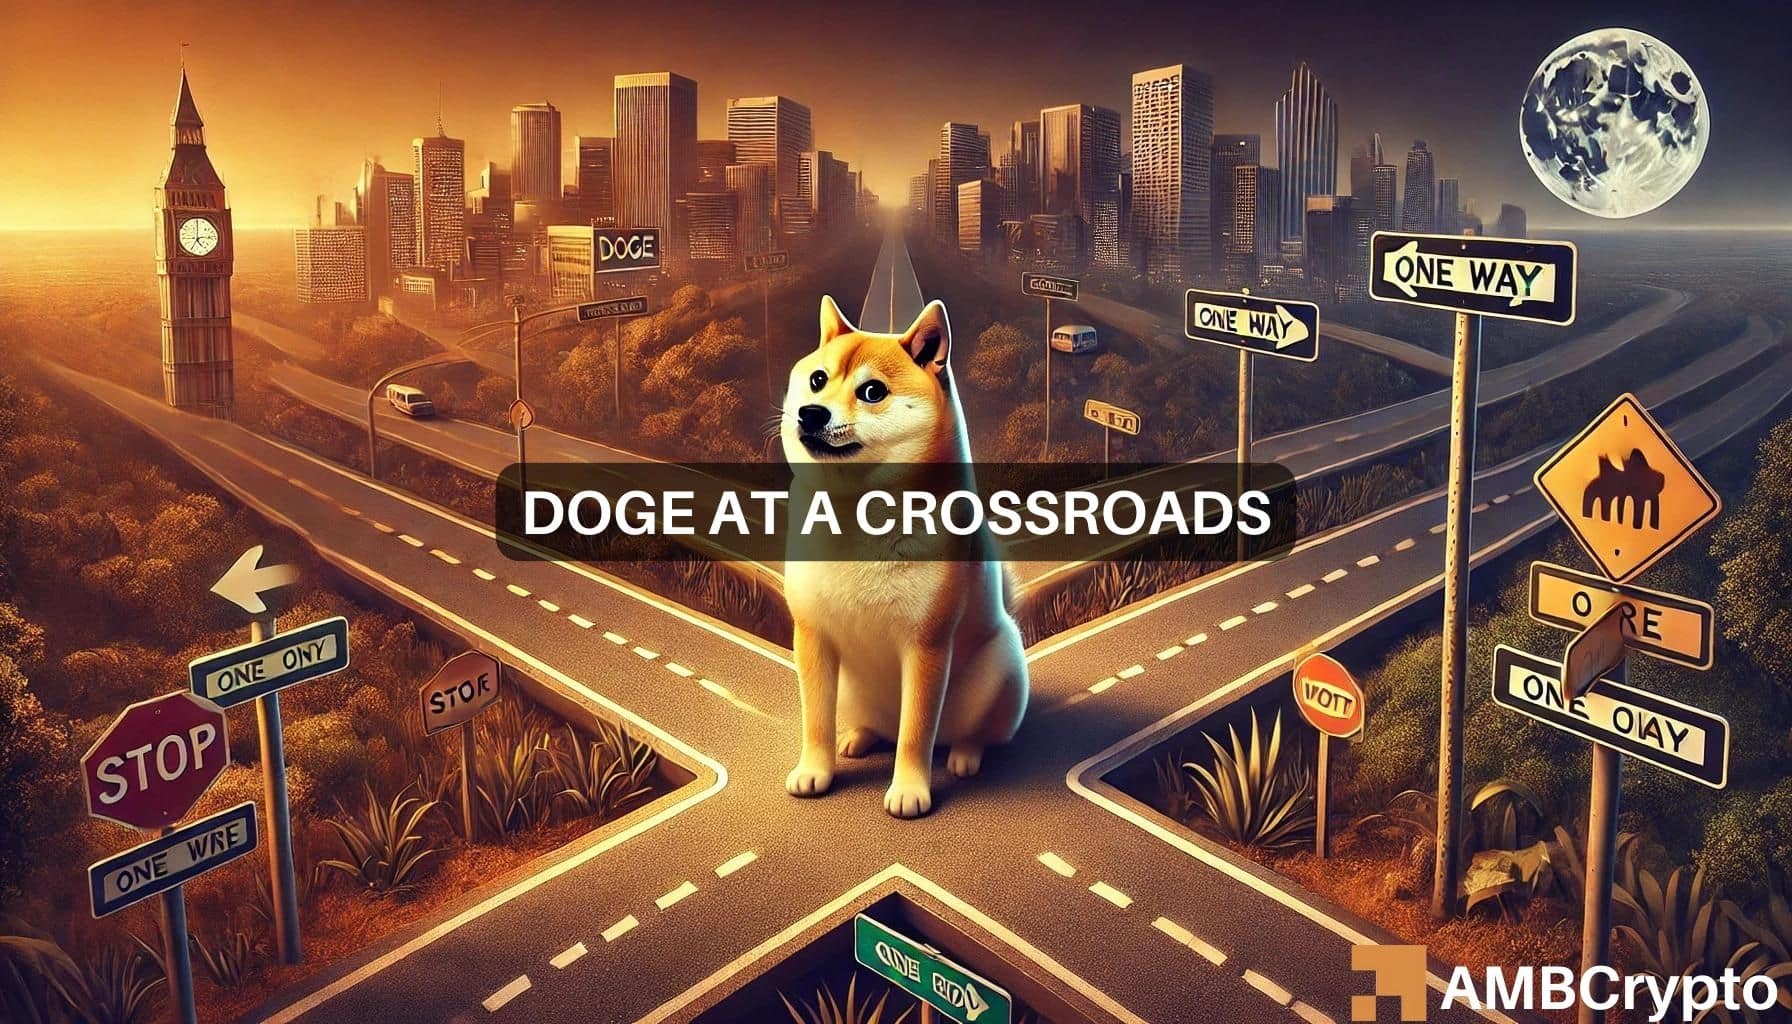 Dogecoin’s make-or-break moment: Can DOGE cross the crucial $0.1184 support?